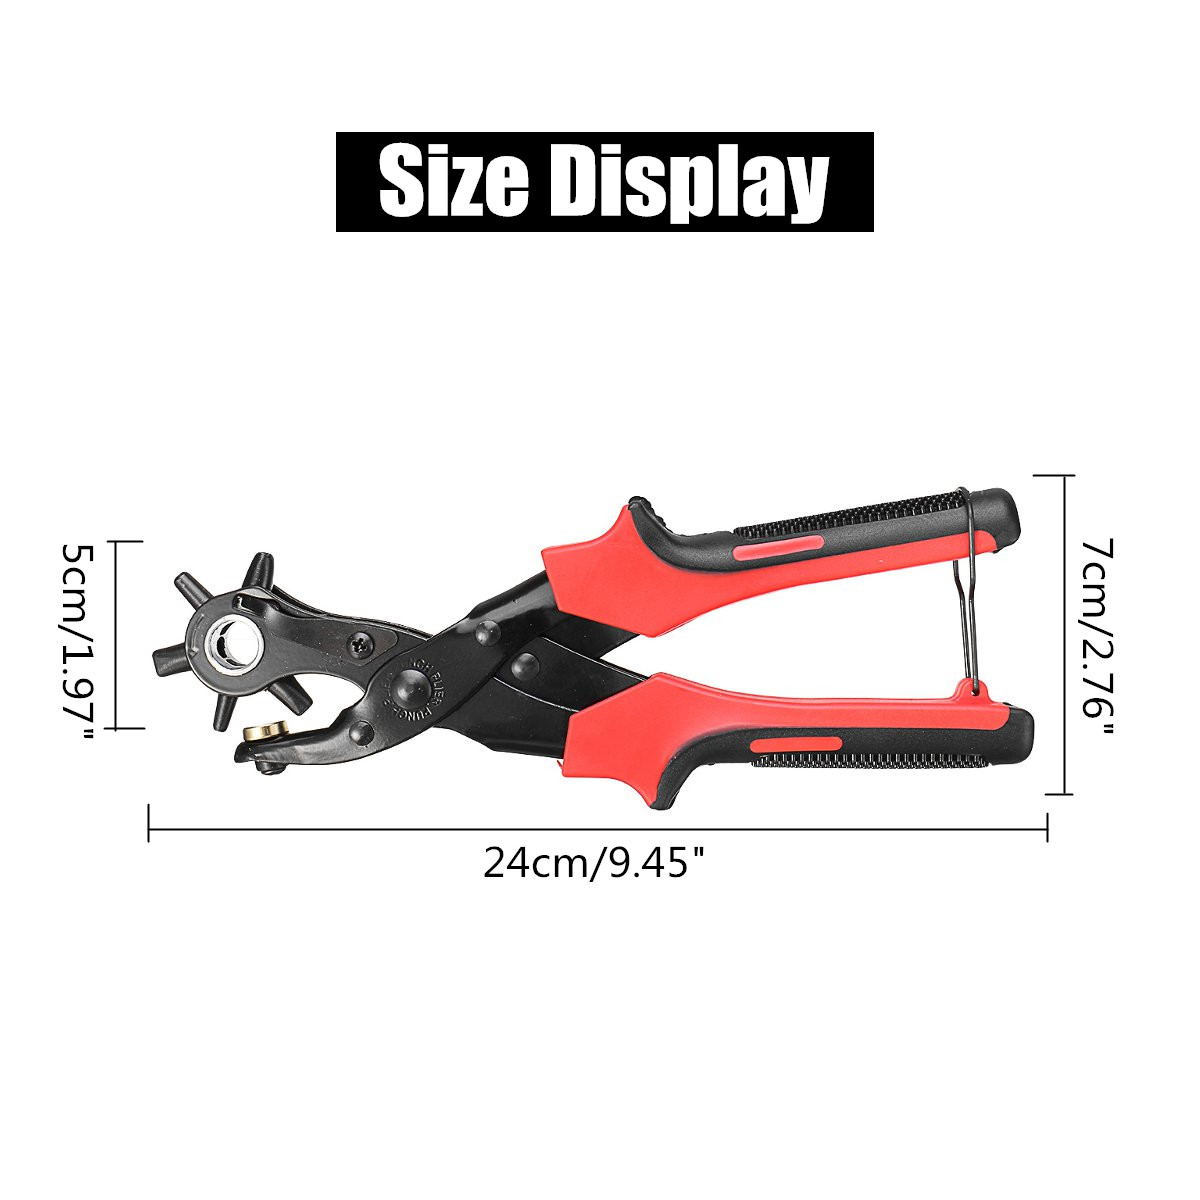 10-Inch-Leather-Revoling-Hole-Punch-Heavy-Duty-6-Size-Pliers-Punch-Belt-Holes-Tool-1437481